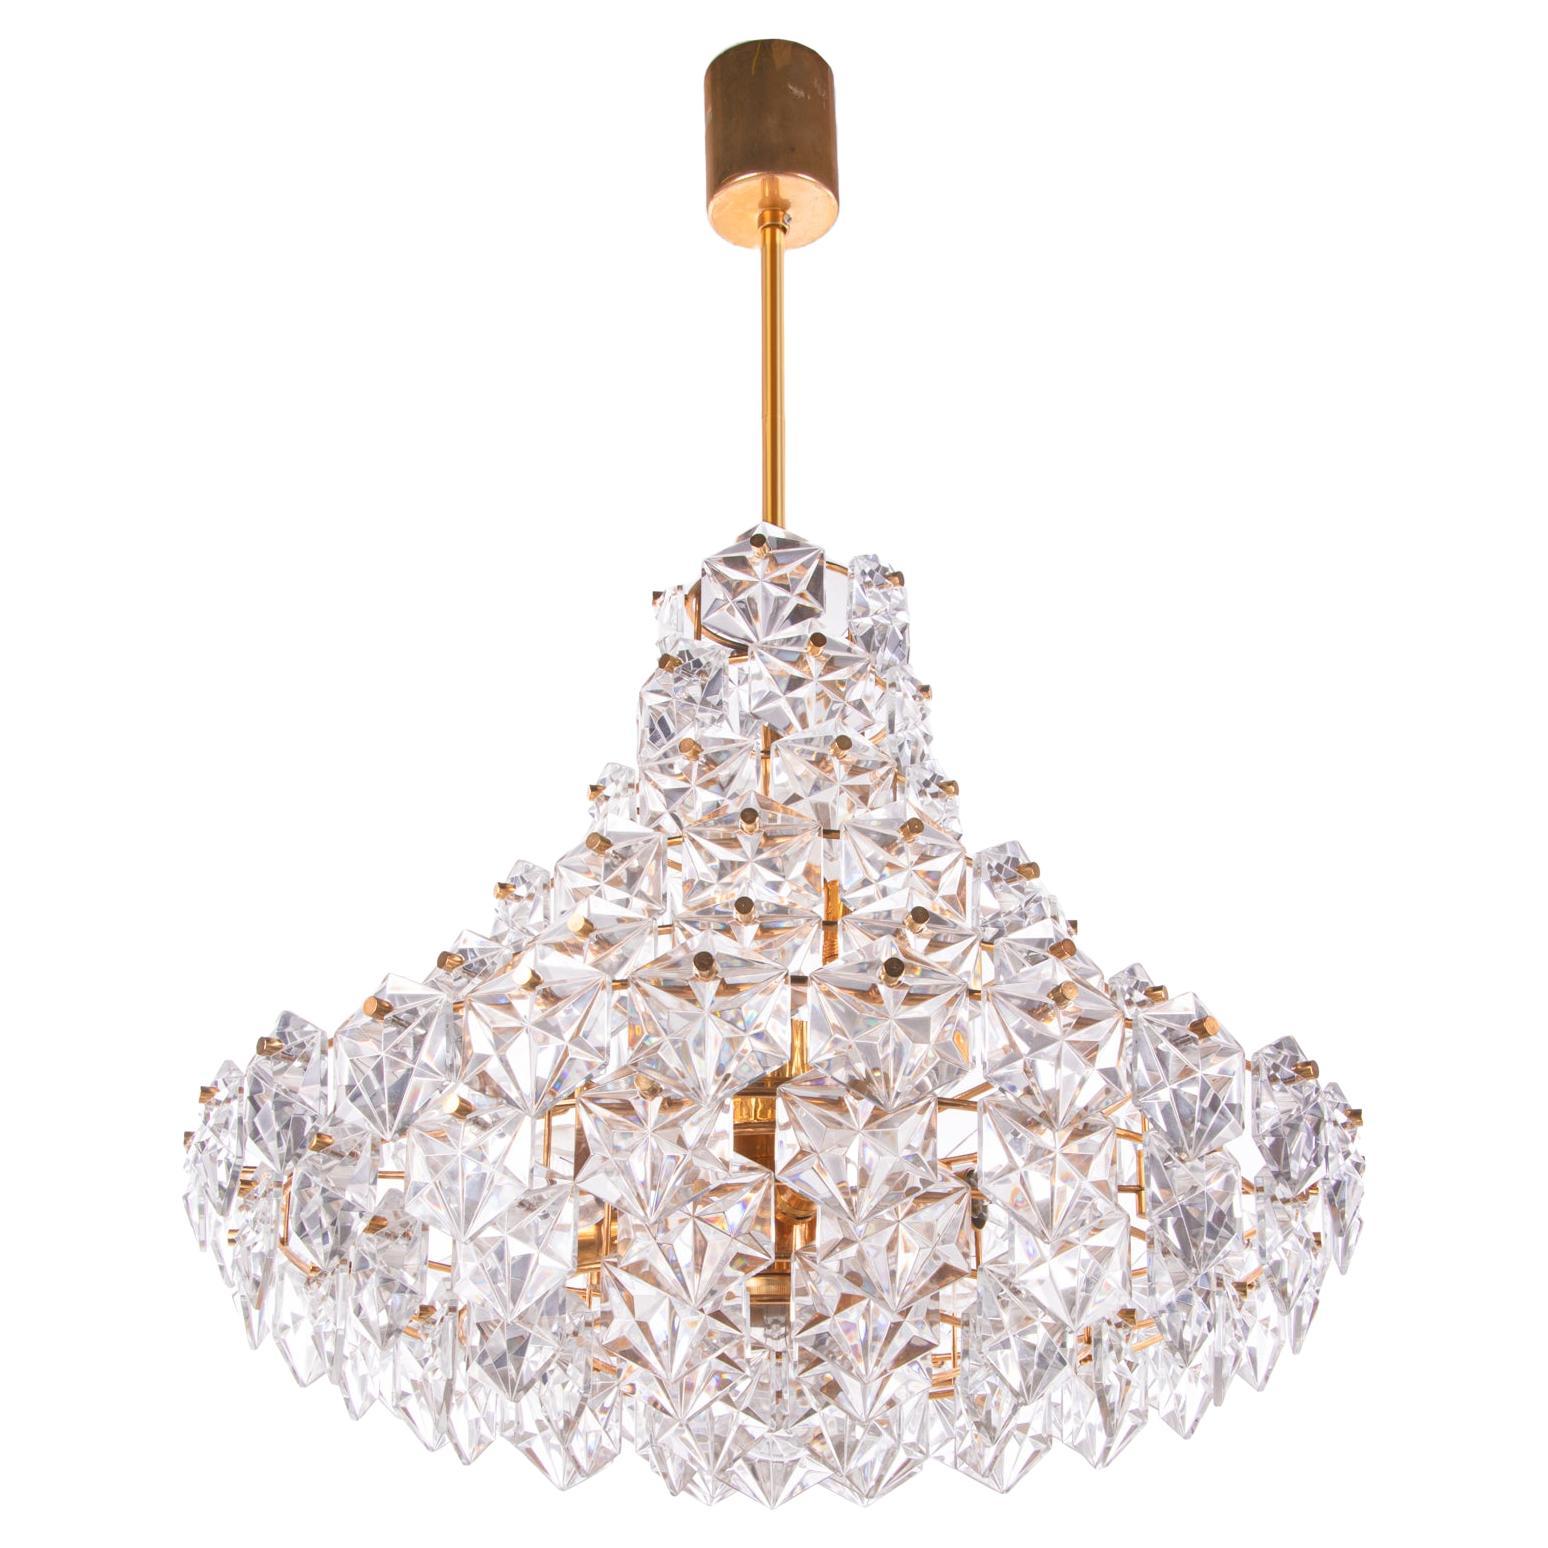 Elegant large ten-tier chandelier with sculptural faceted crystals on a gold-plated brass frame. Chandelier illuminates beautifully and offers a lot of light. Gem from the time. With this light you make a clear statement in your interior design. A